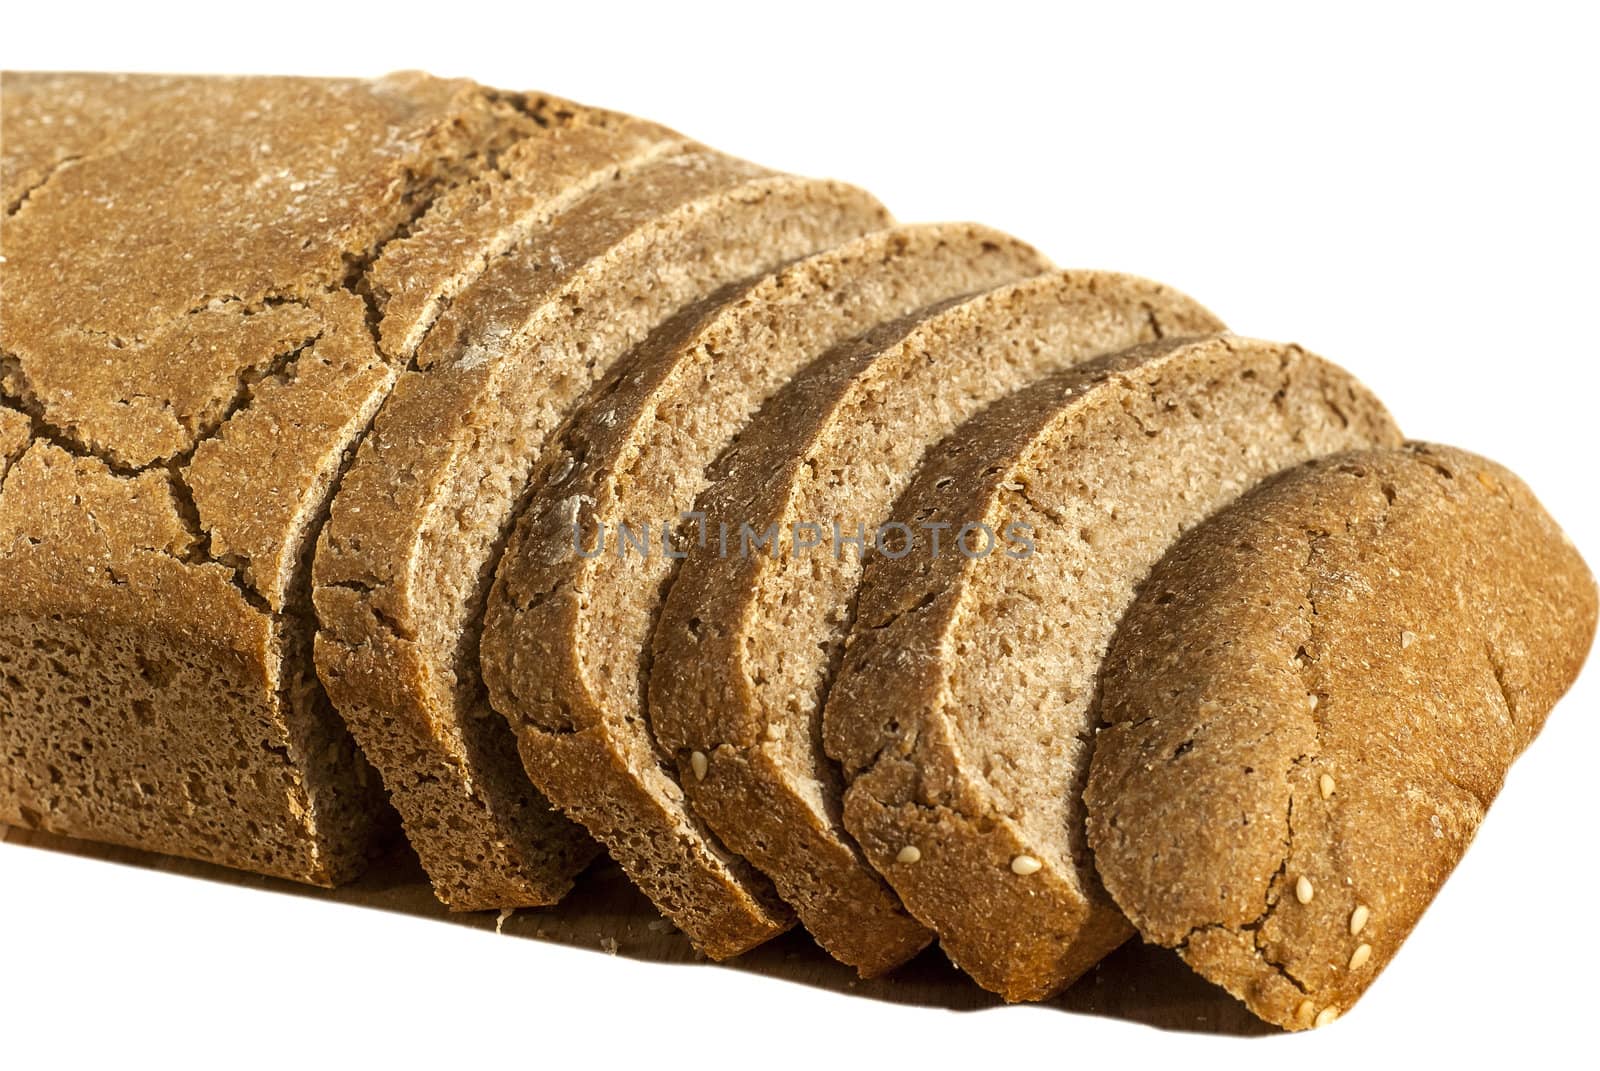 Organic yeast home-made sliced  bread isolated on white background